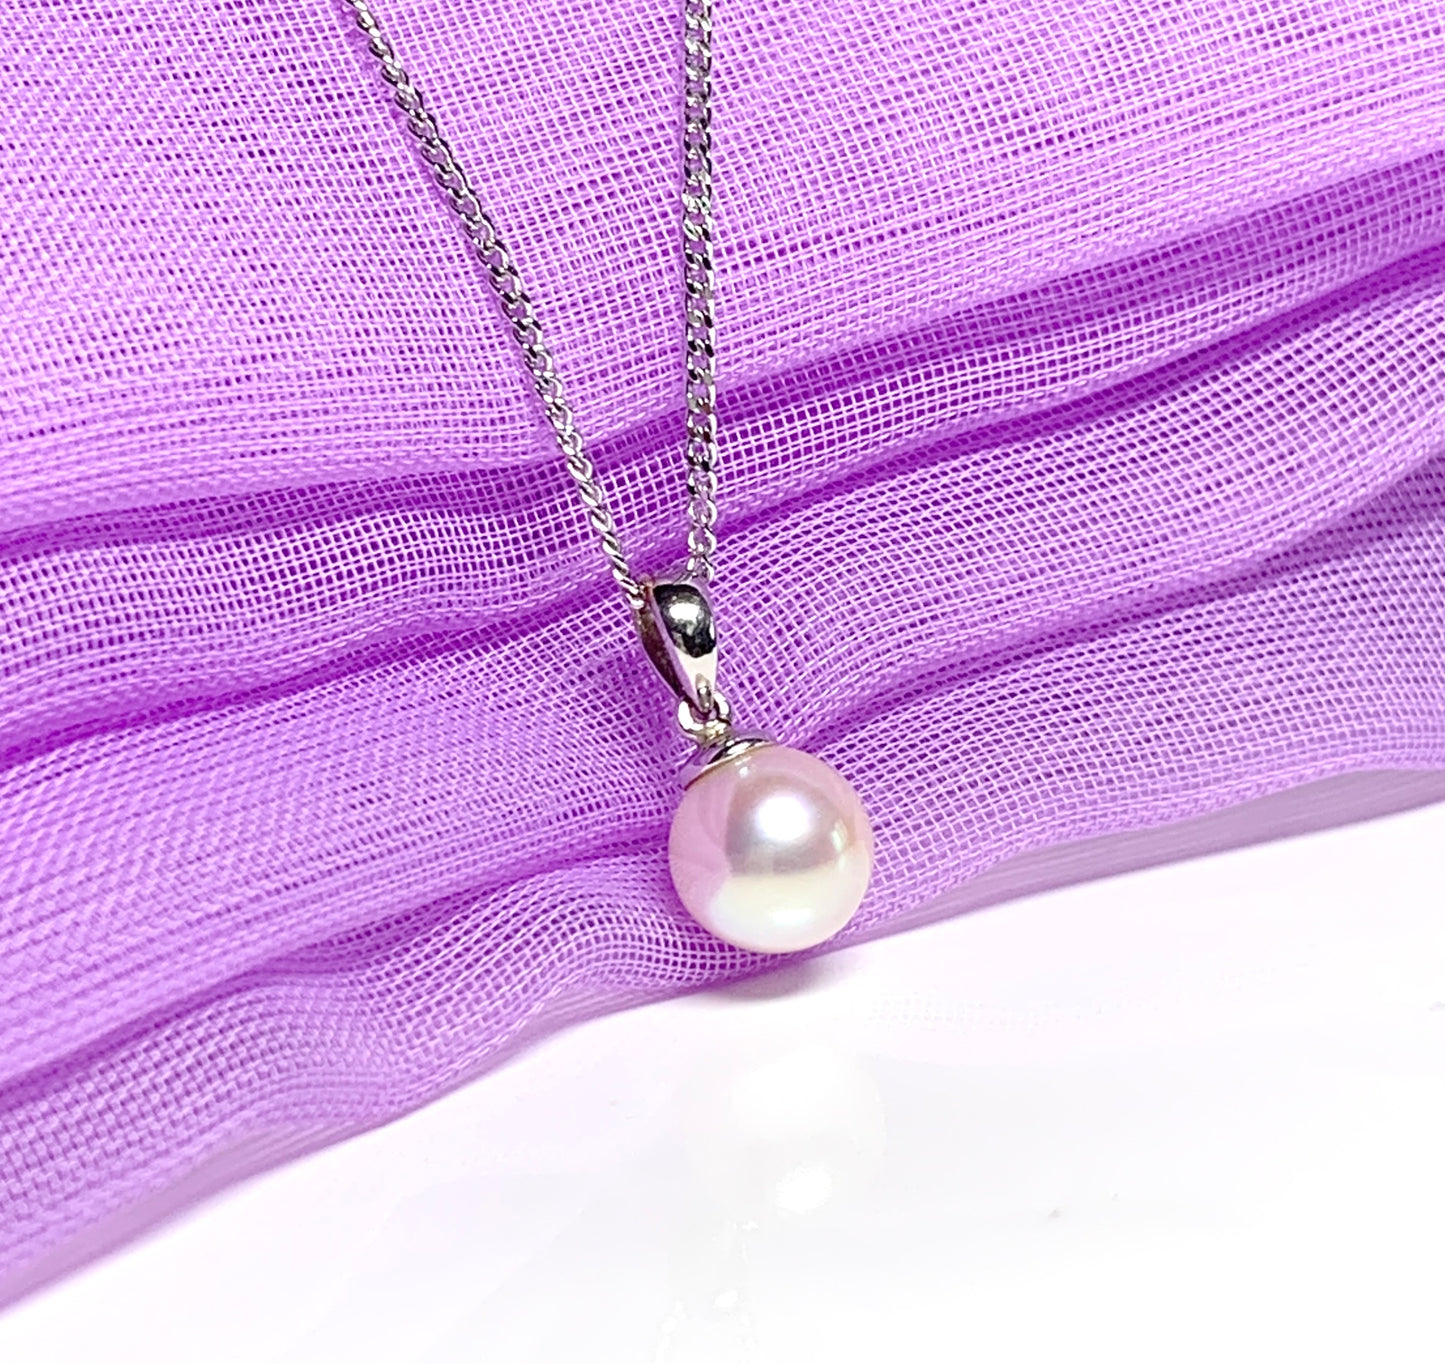 White gold round freshwater cultured pearl necklace pendant